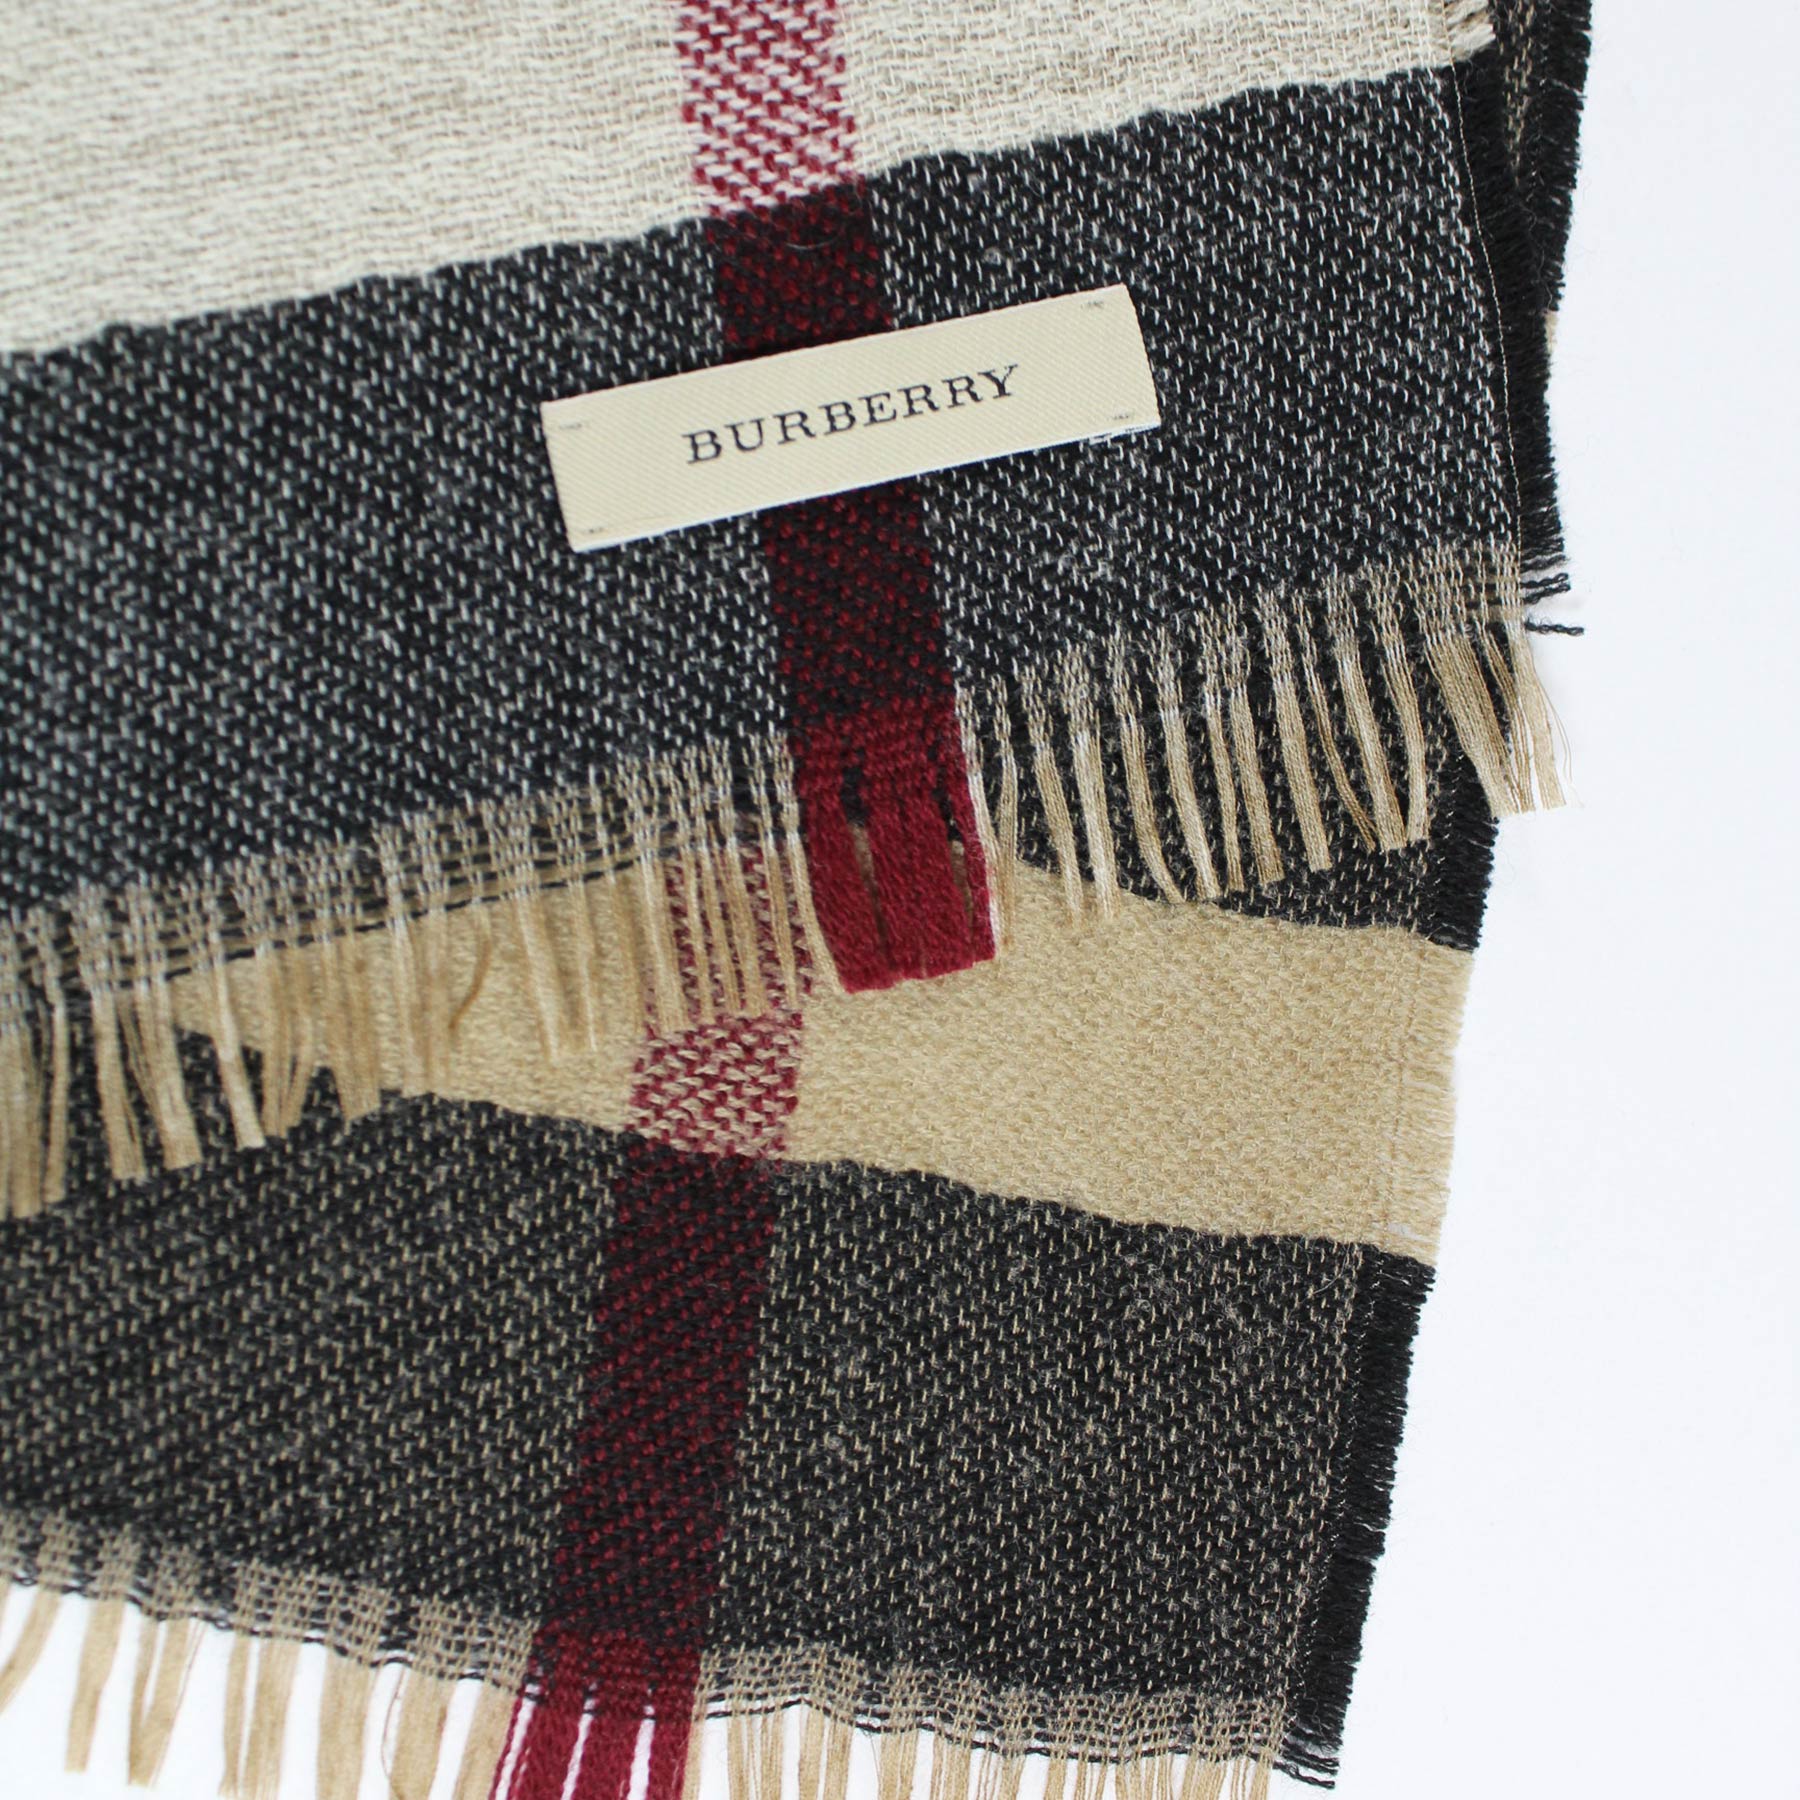 Burberry Scarf Signature Check - Wool Shawl In Italy SALE -